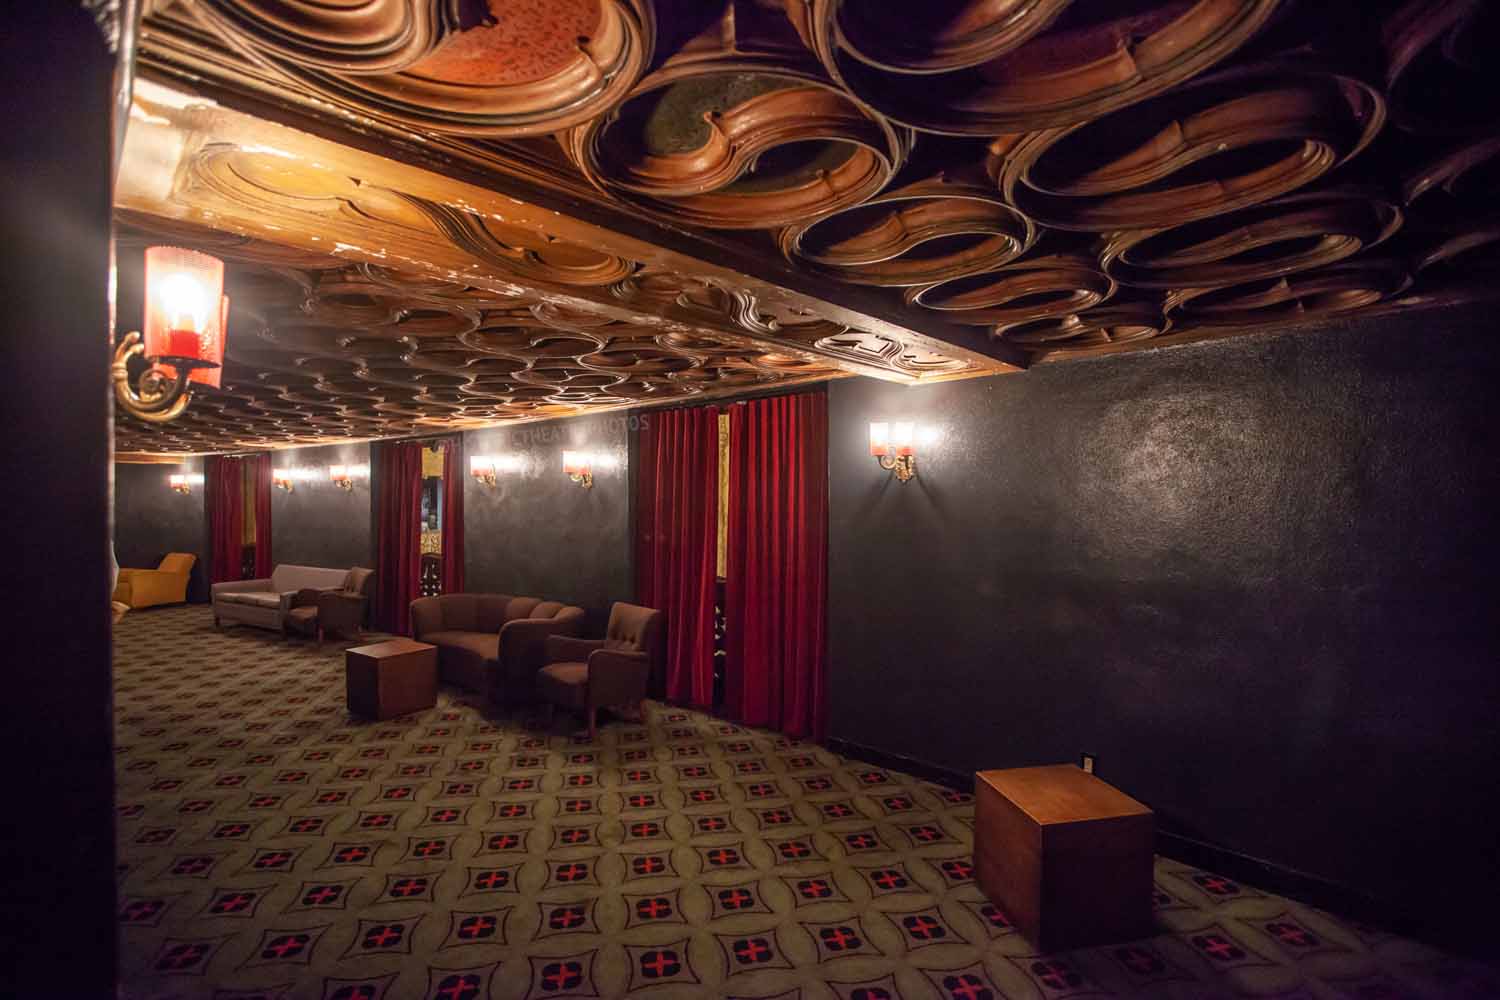 The United Theater on Broadway, Los Angeles, Los Angeles: Downtown: Mezzanine Corridor